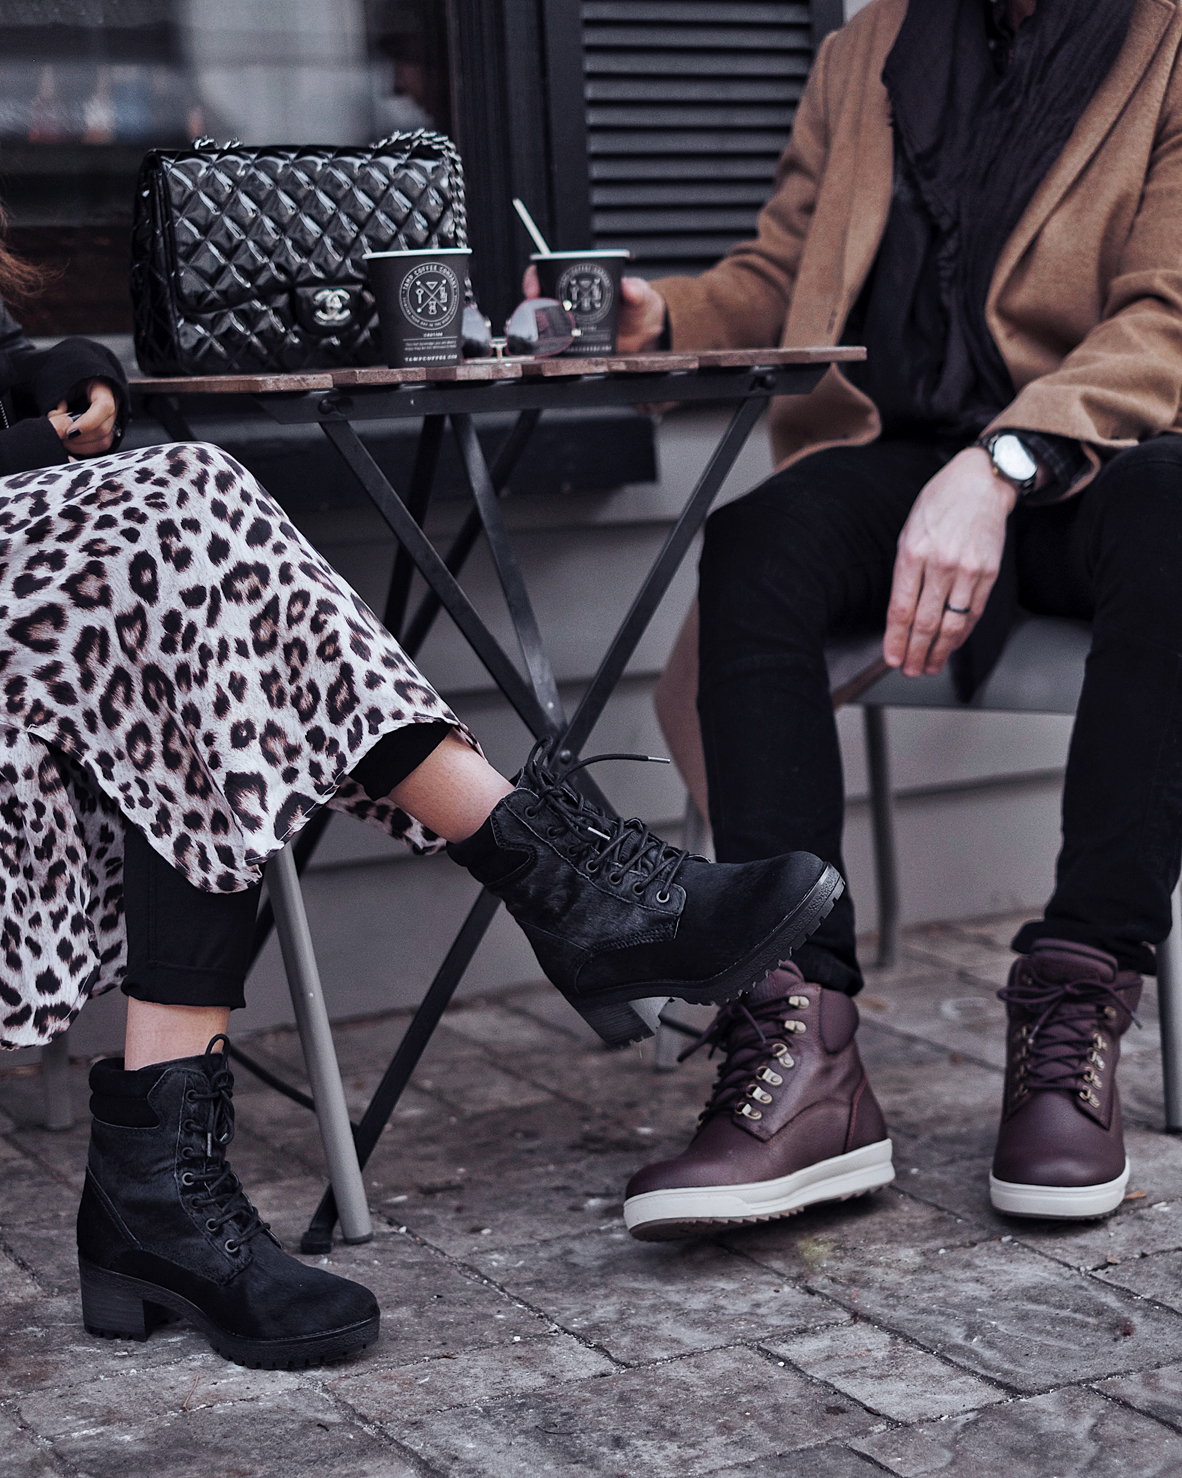 THE FASHIONABLE WINTER BOOTS YOU'LL WANT TO WEAR YEAR ROUND